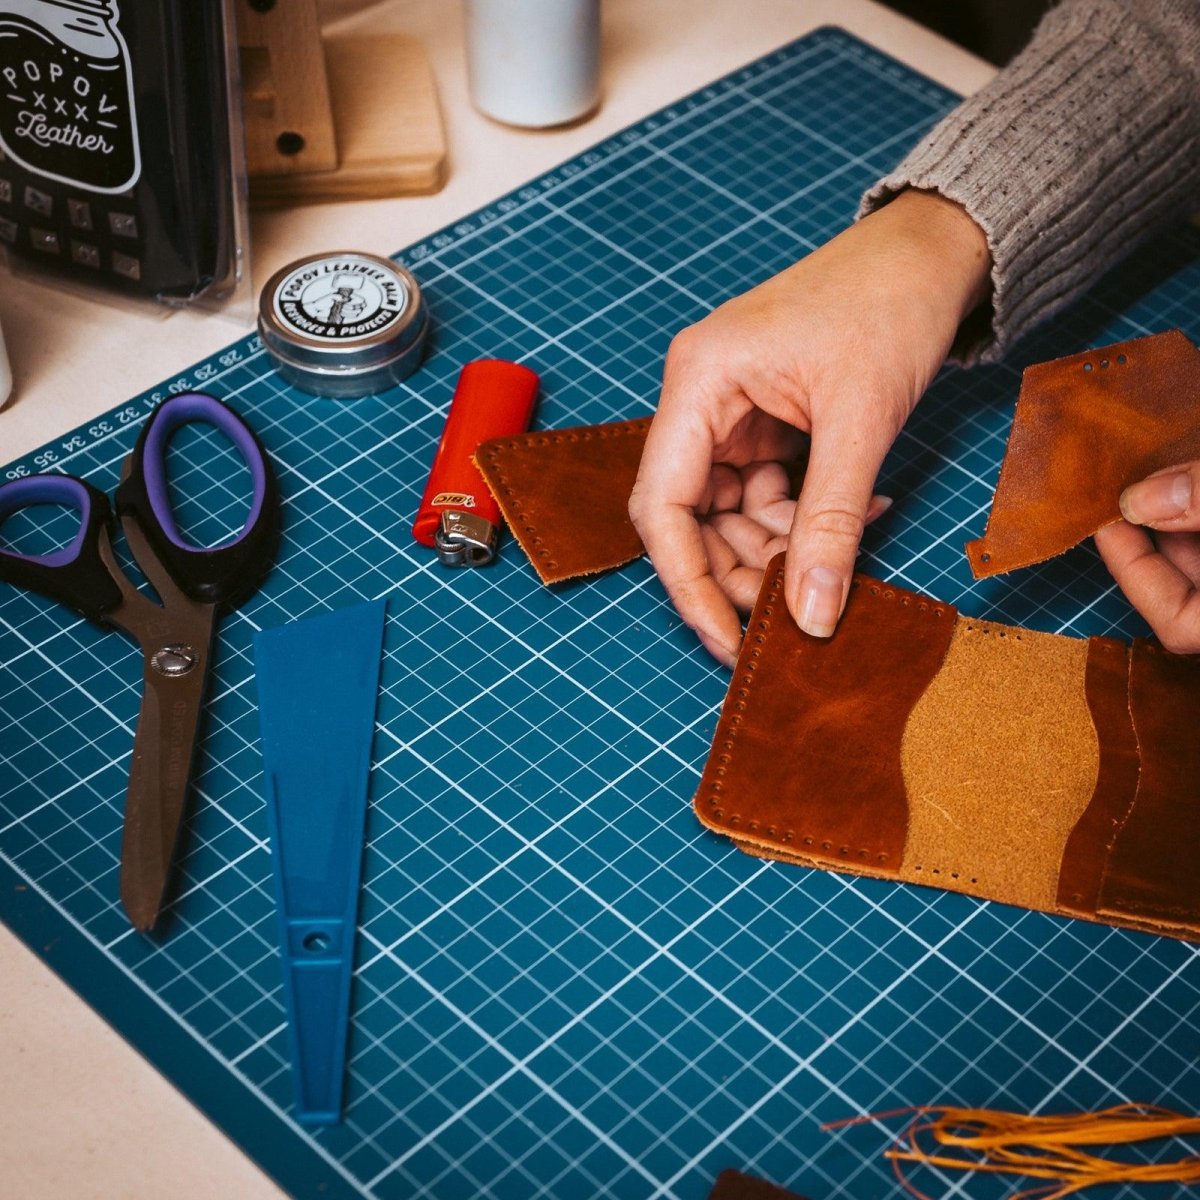 How to Begin Your Leatherworking Journey | Popov Leather